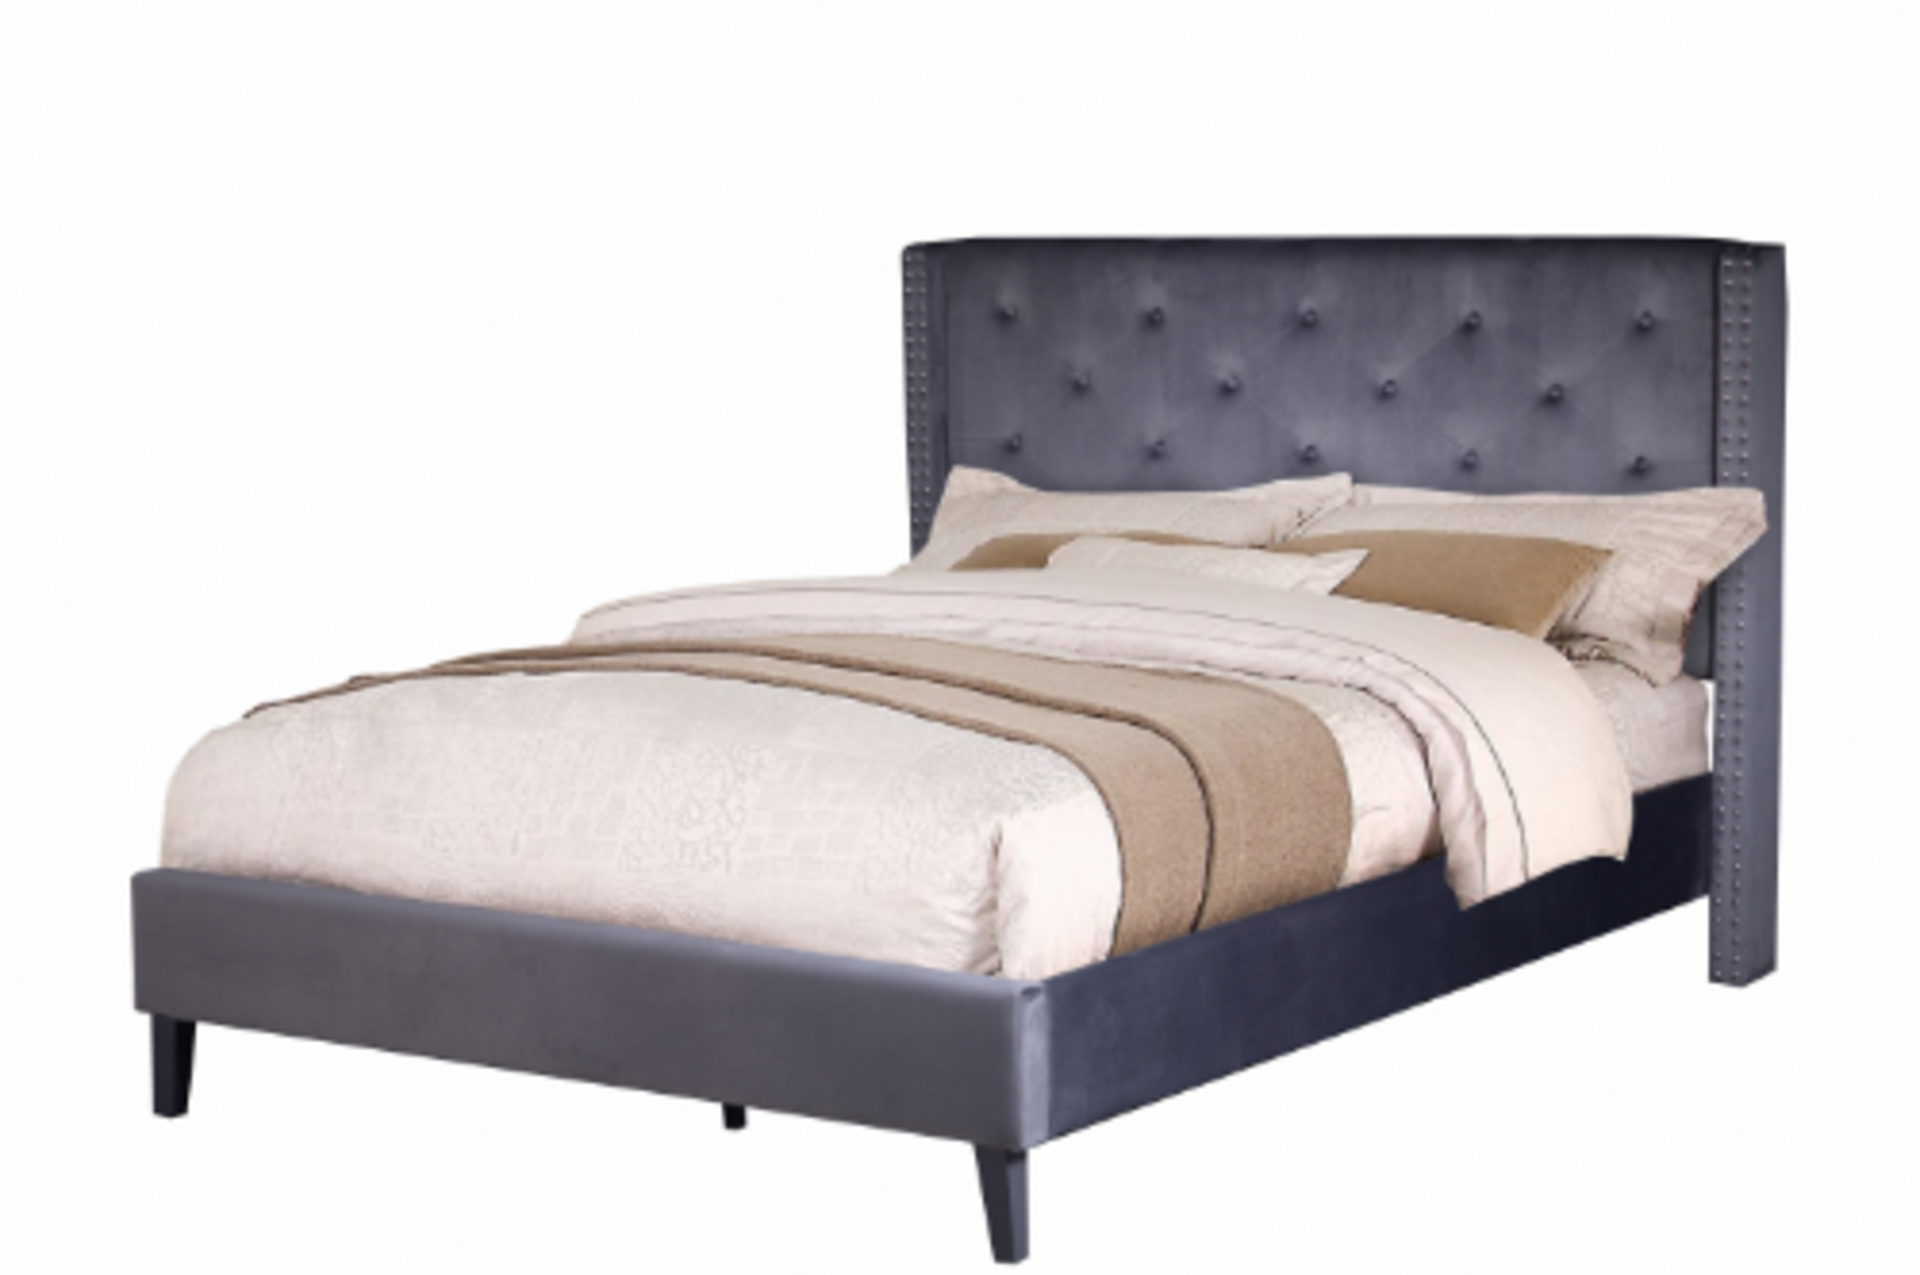 |1X|Perfect Home Chanel 4ft 6in Double Bed Faux Je